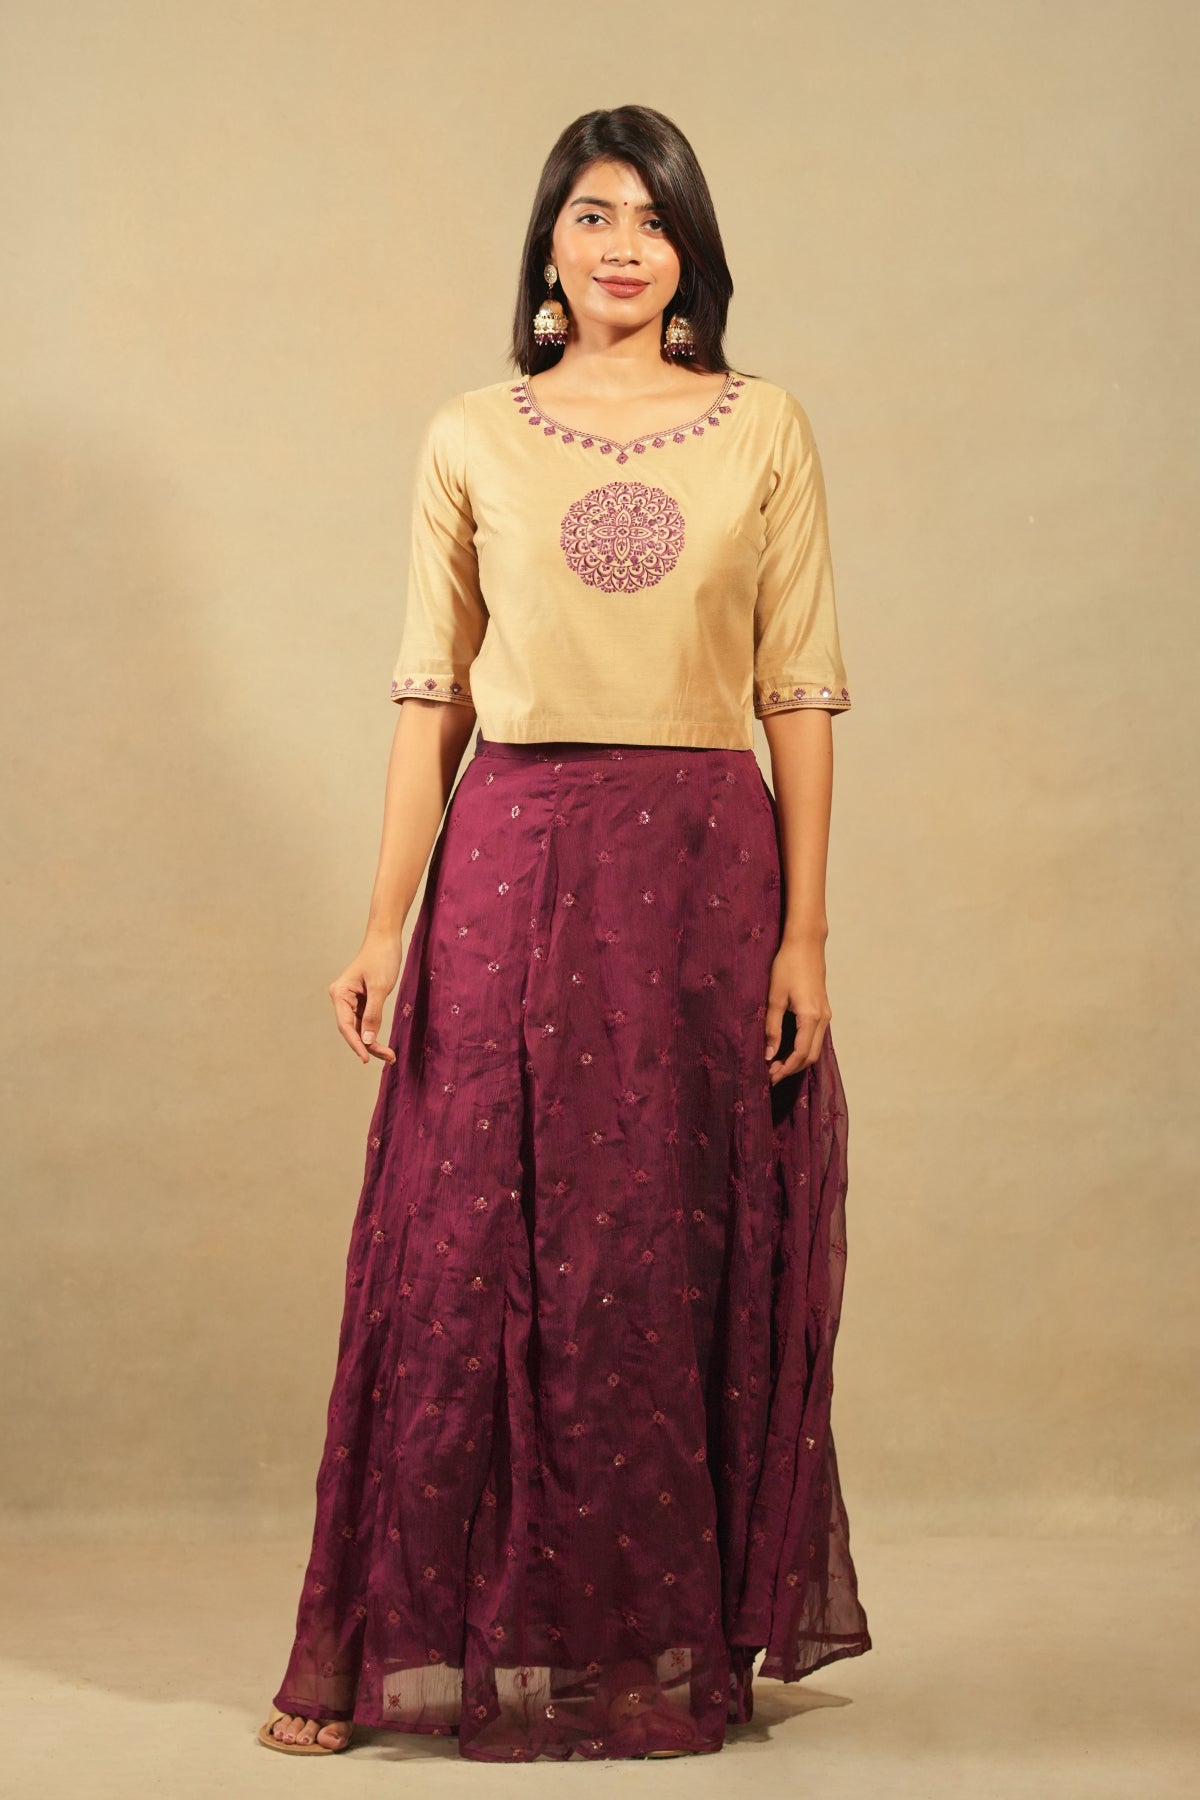 Mandala Placement Top With All Over Sequins Skirt Set - Beige & Burgundy